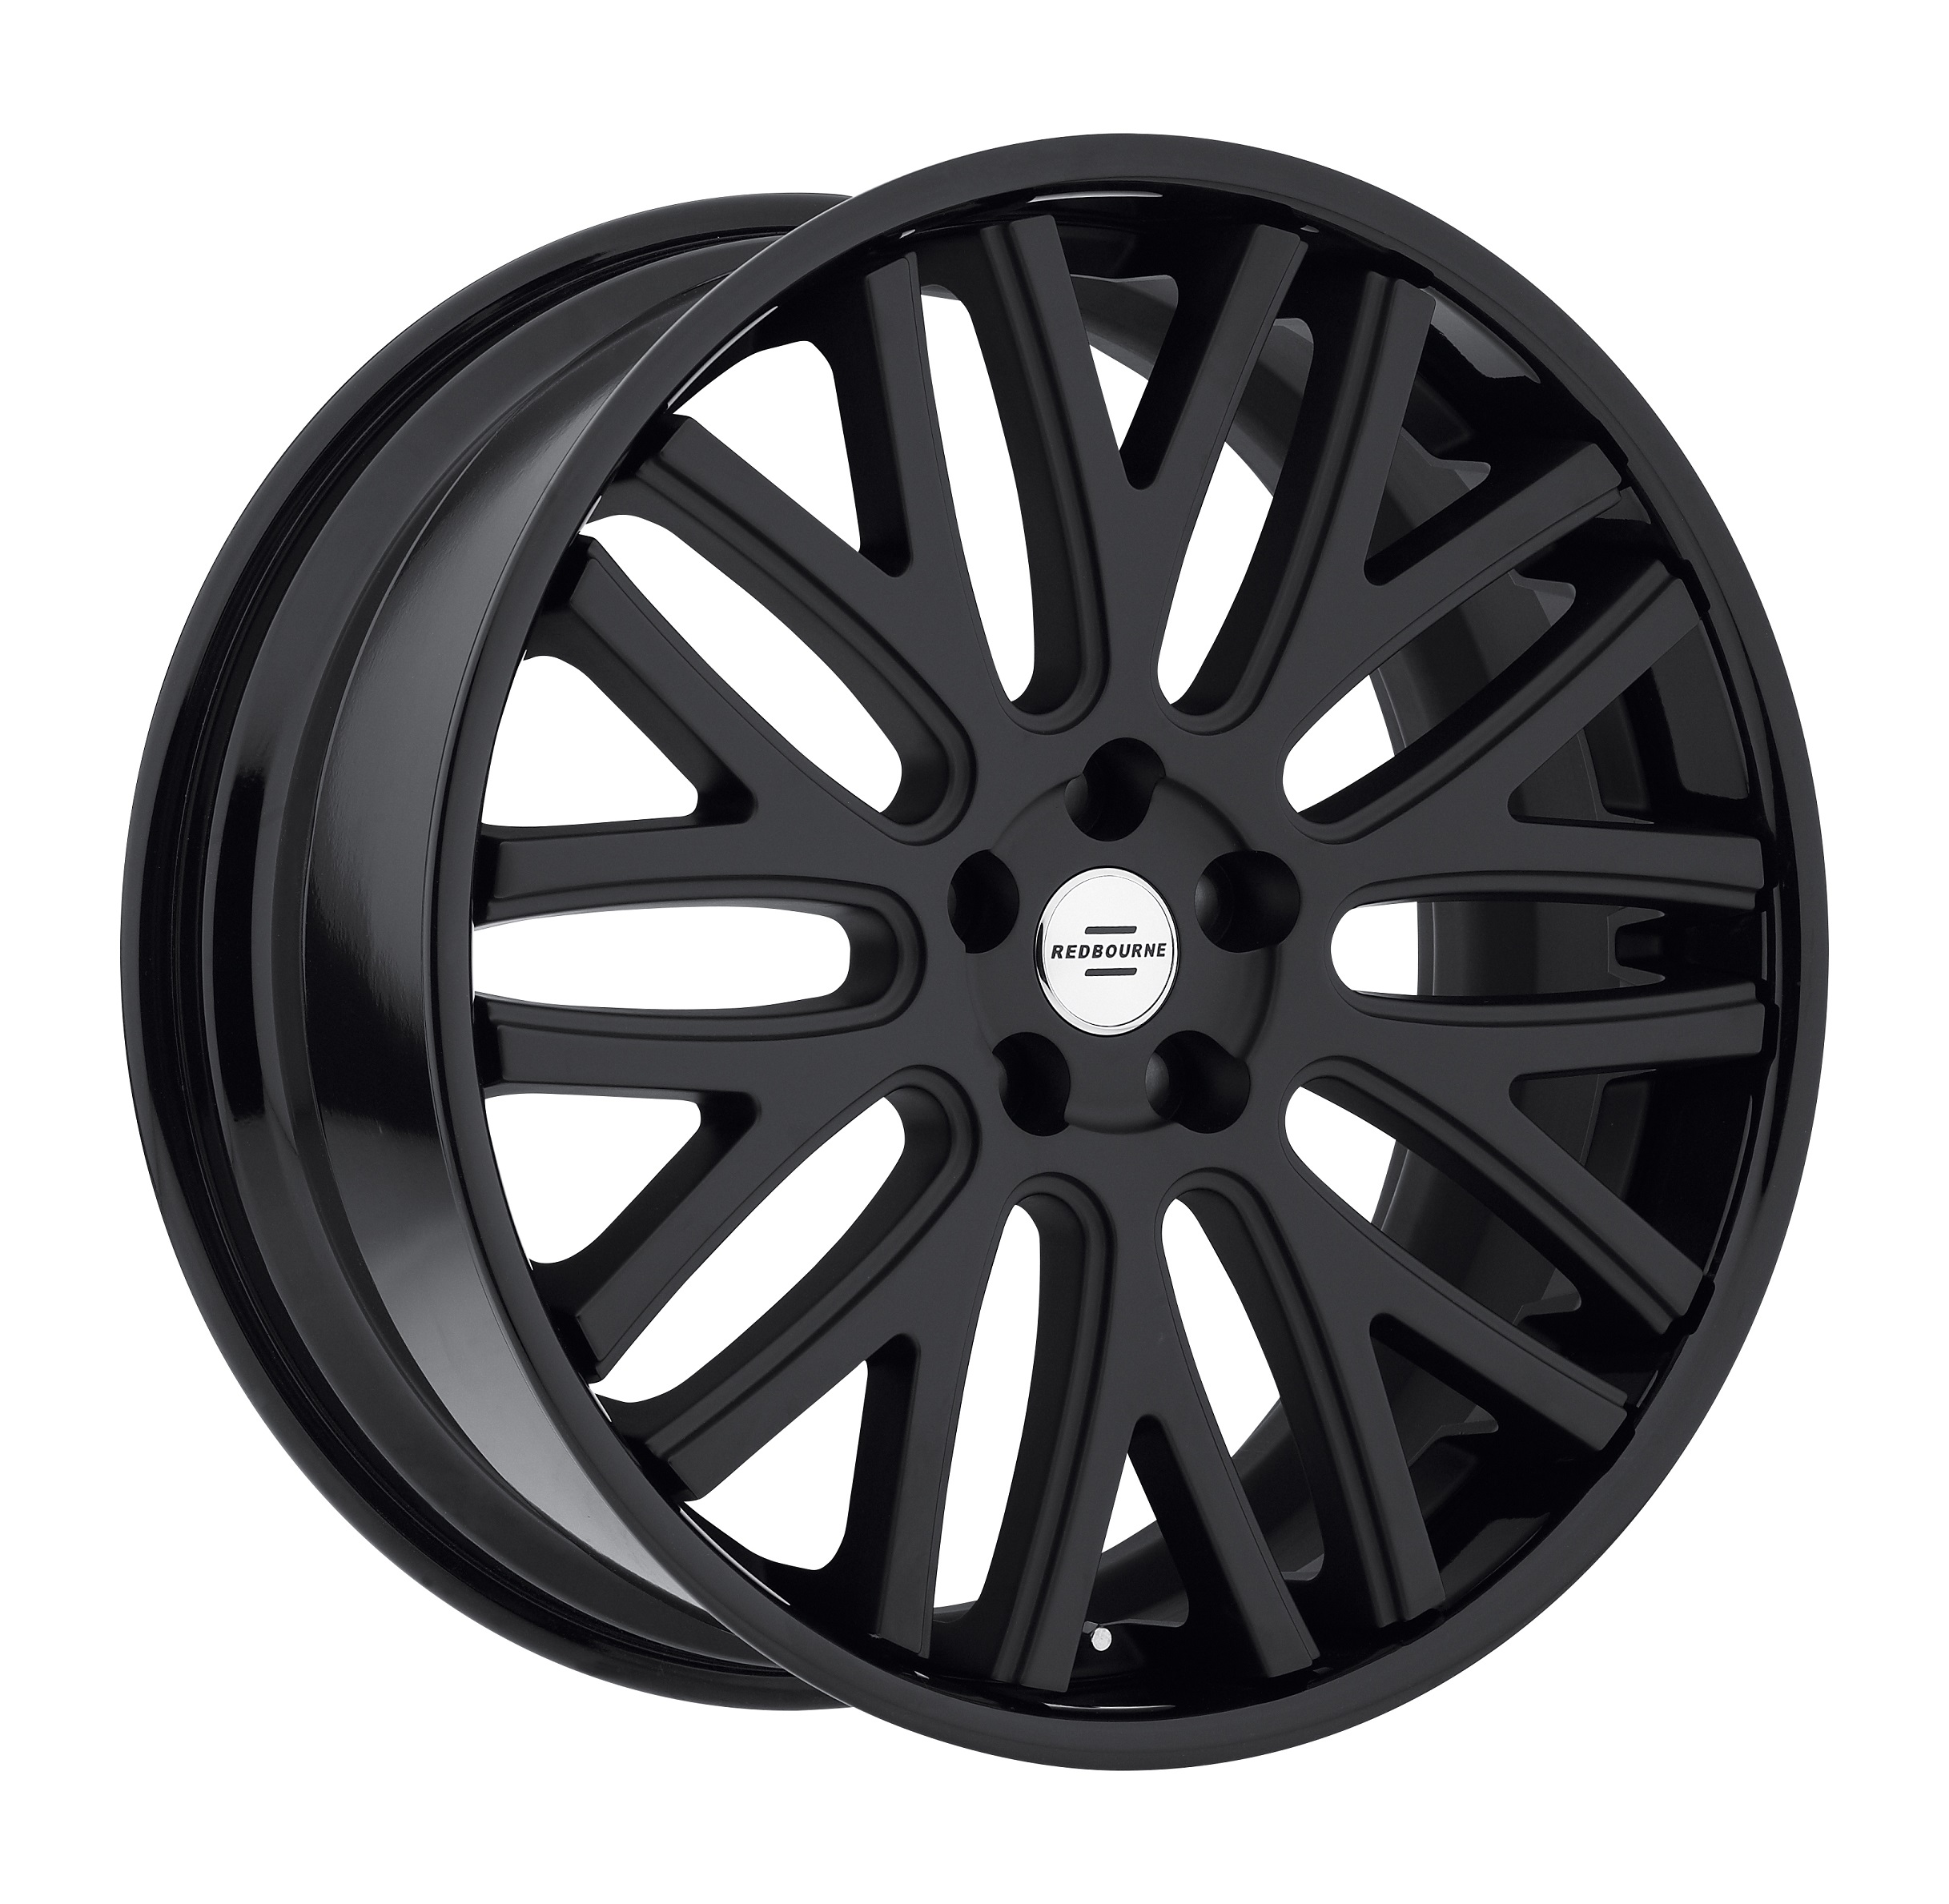 Aftermarket Land Rover Wheels by Redbourne - the Hampshire